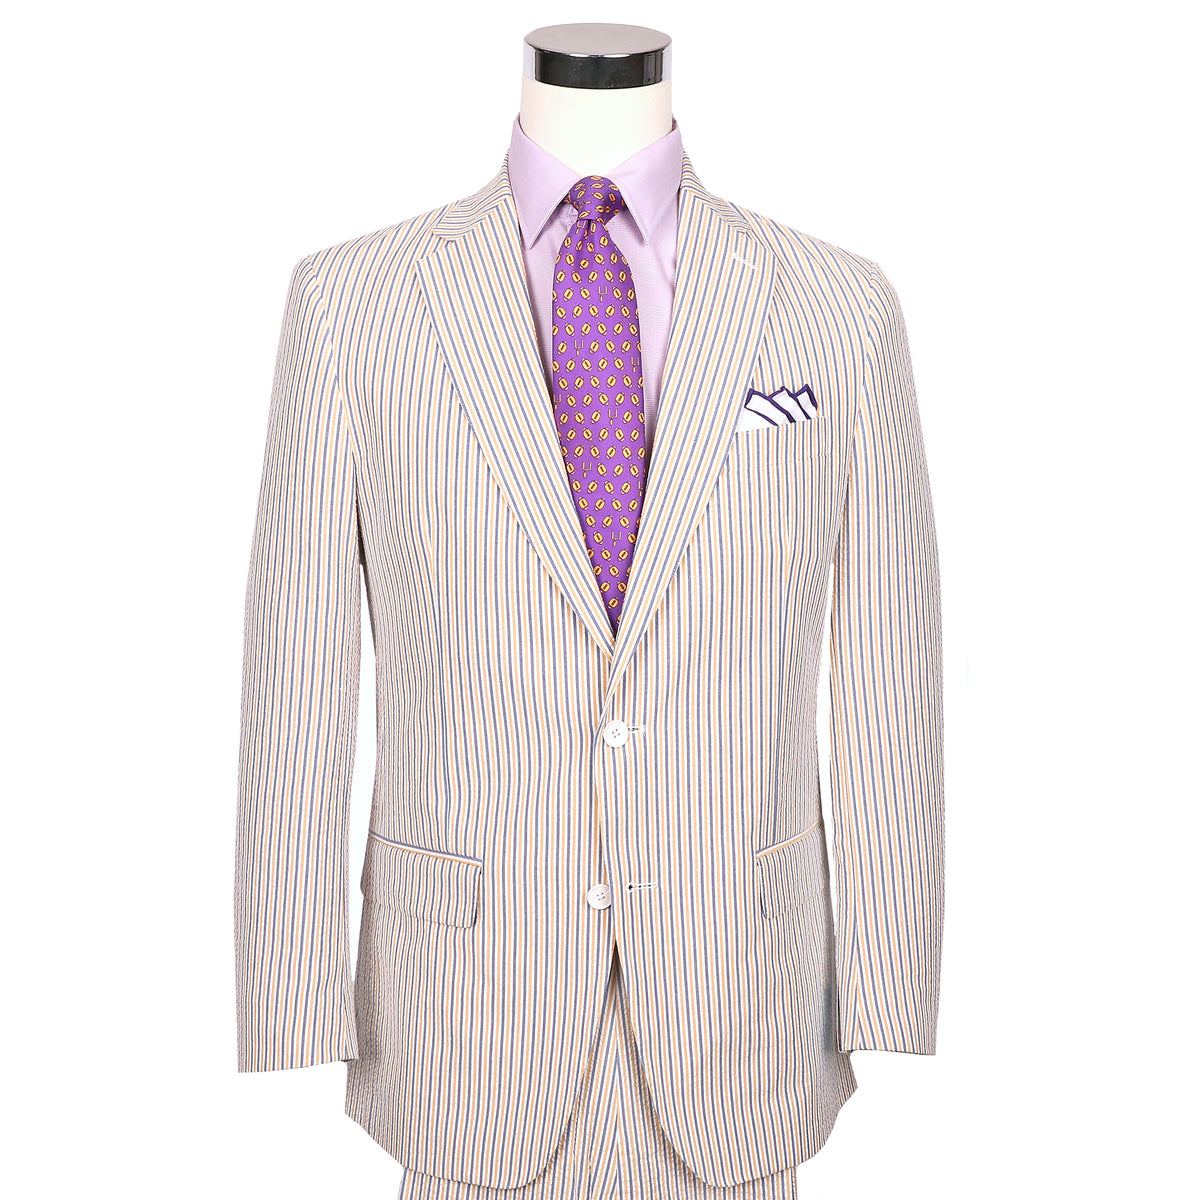 Show your purple &amp; gold spirit in our Audubon Purple &amp; Gold Seersucker Suit.  ** Pant waist is 6&quot; smaller than the chest measurement. For example, if you order a 40R jacket, the pant size will be 34 **  100% Cotton Haspel Exclusive Seersucker • Maximized Seersucker Pucker • Audubon Classic Fit • Natural Shoulder • Two Buttons • Flap Pockets • 3/4 Lined for Maximum Cool • Side Vents • Notch Lapel • Dry Clean • Imported